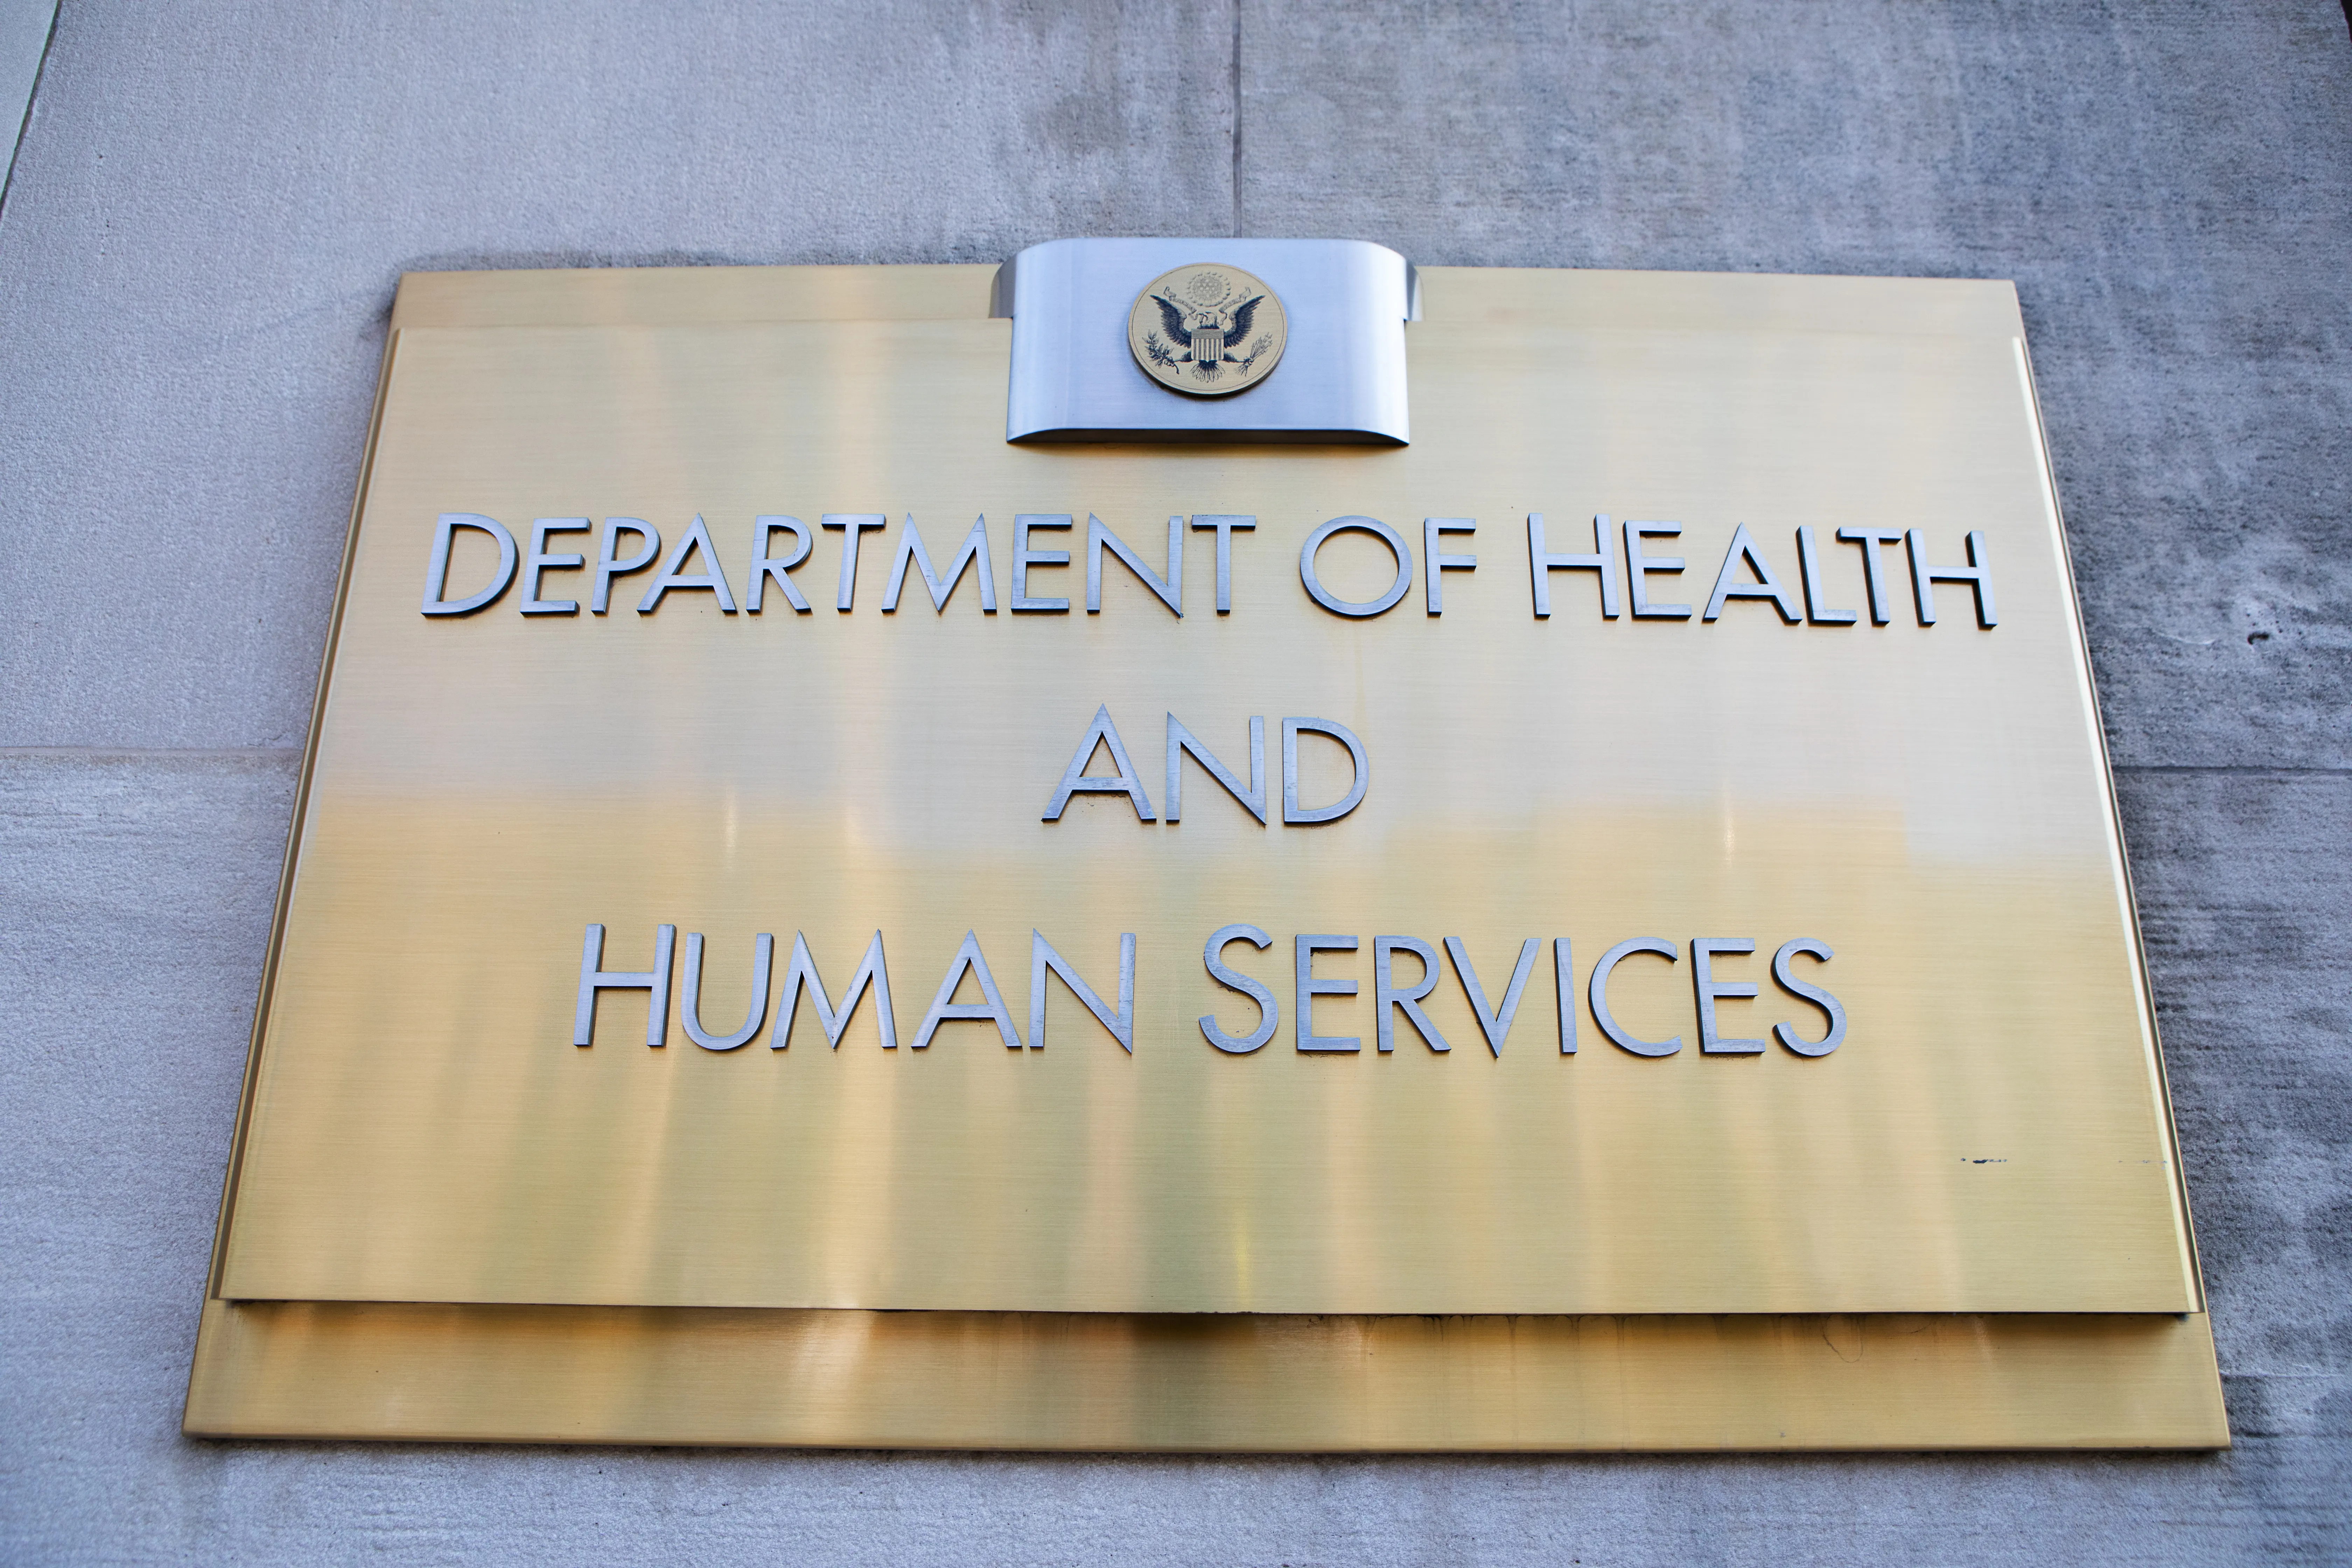 The Department of Health and Human Services at the Wilbur J. Cohen Federal Building.?w=200&h=150